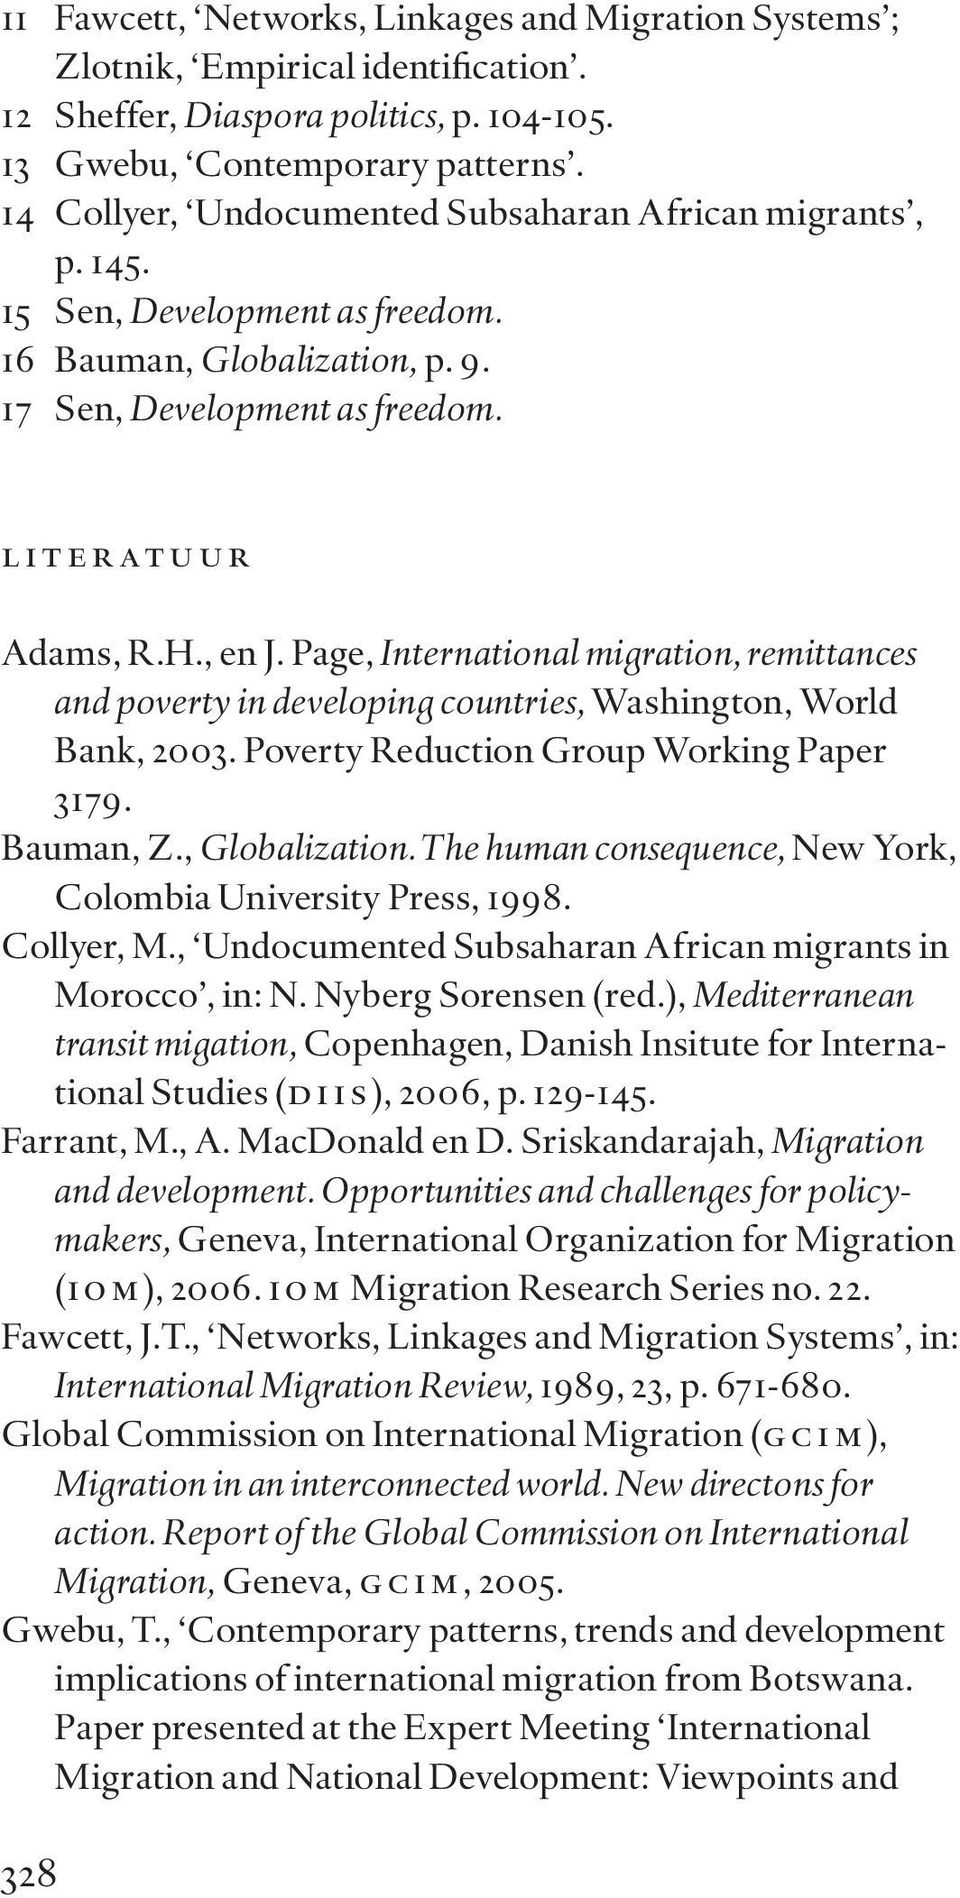 Page, International migration, remittances and poverty in developing countries, Washington, World Bank, 2003. Poverty Reduction Group Working Paper 3179. Bauman, Z., Globalization.